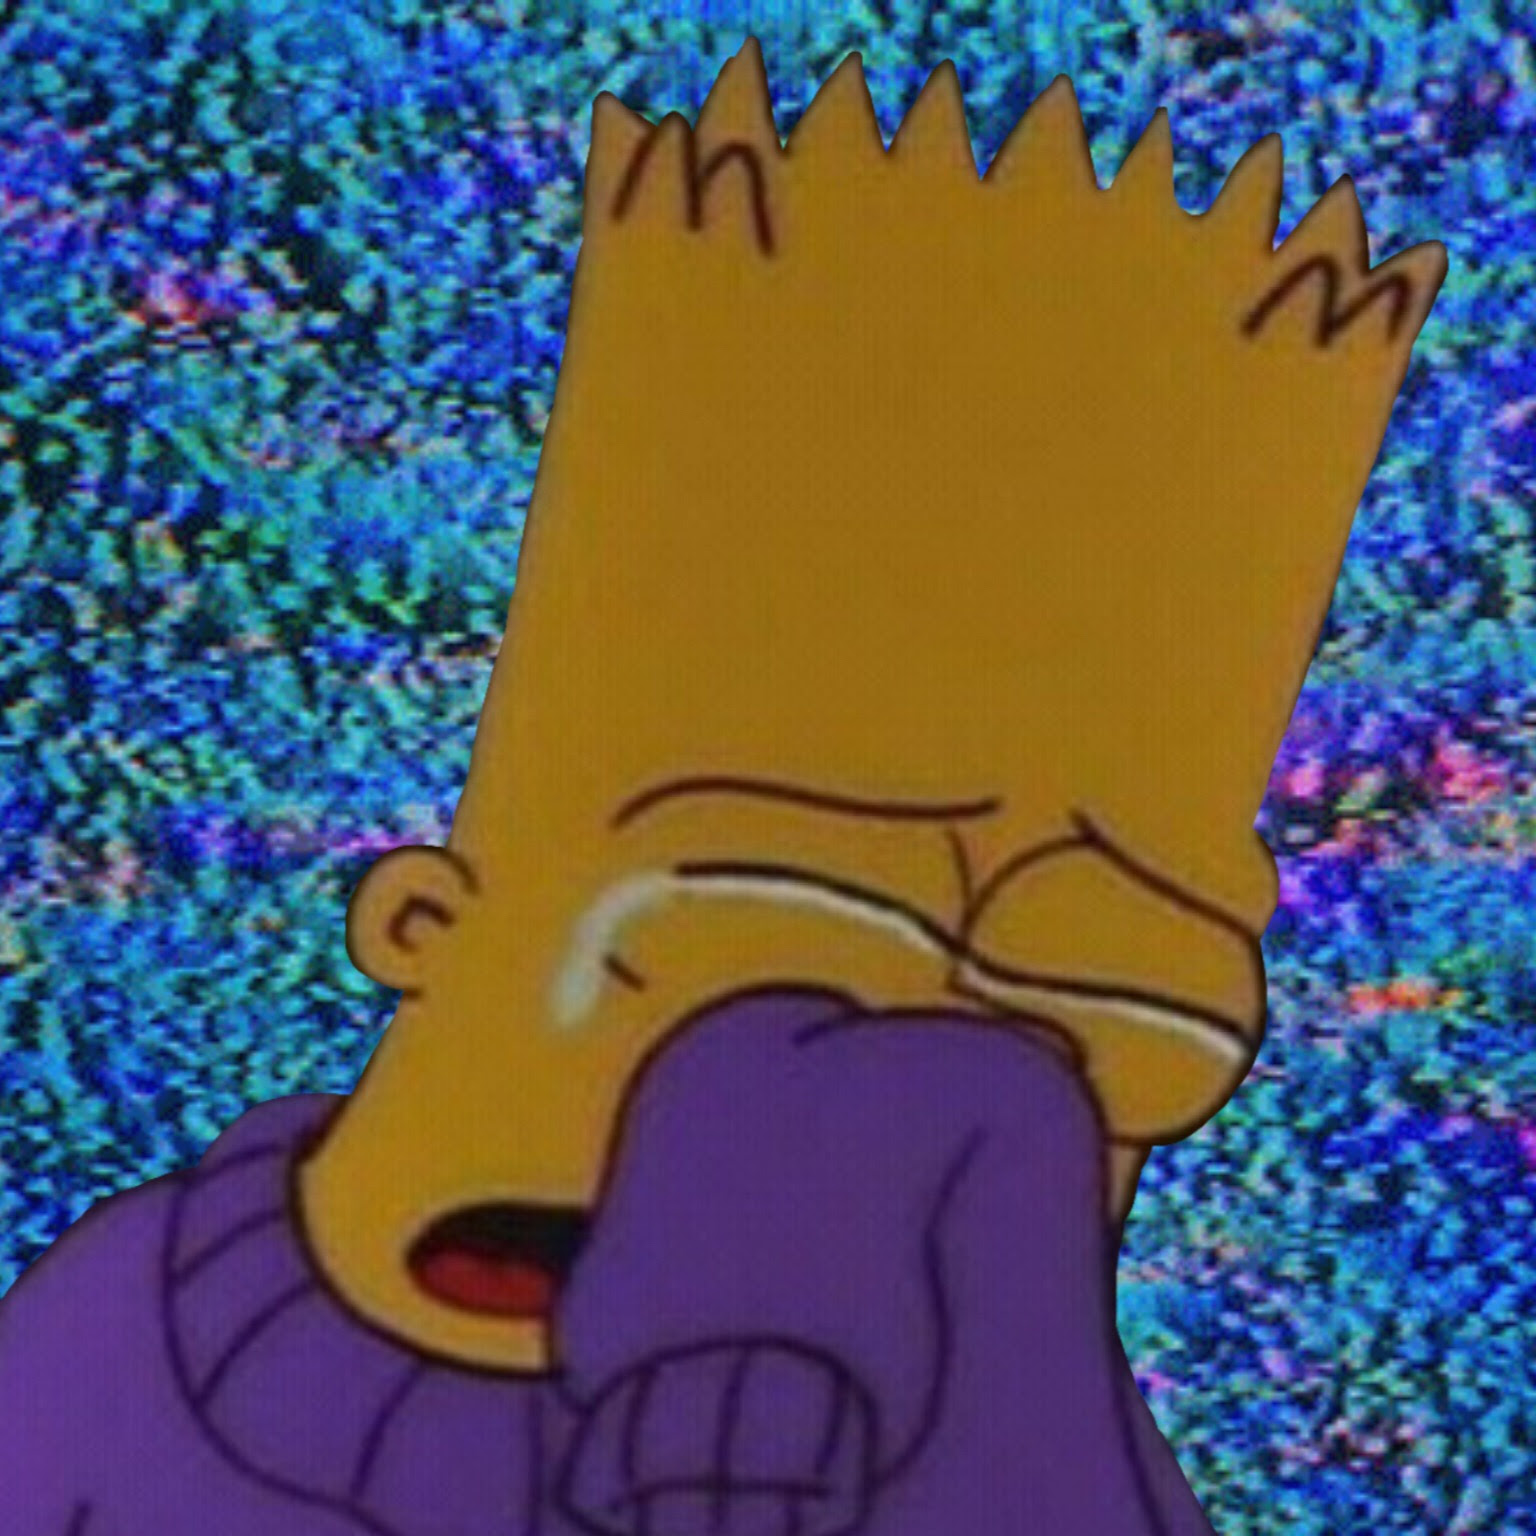 1080x1080 Sad Heart Bart Image About Sad In Im Broken🚬 By Karǝn On 